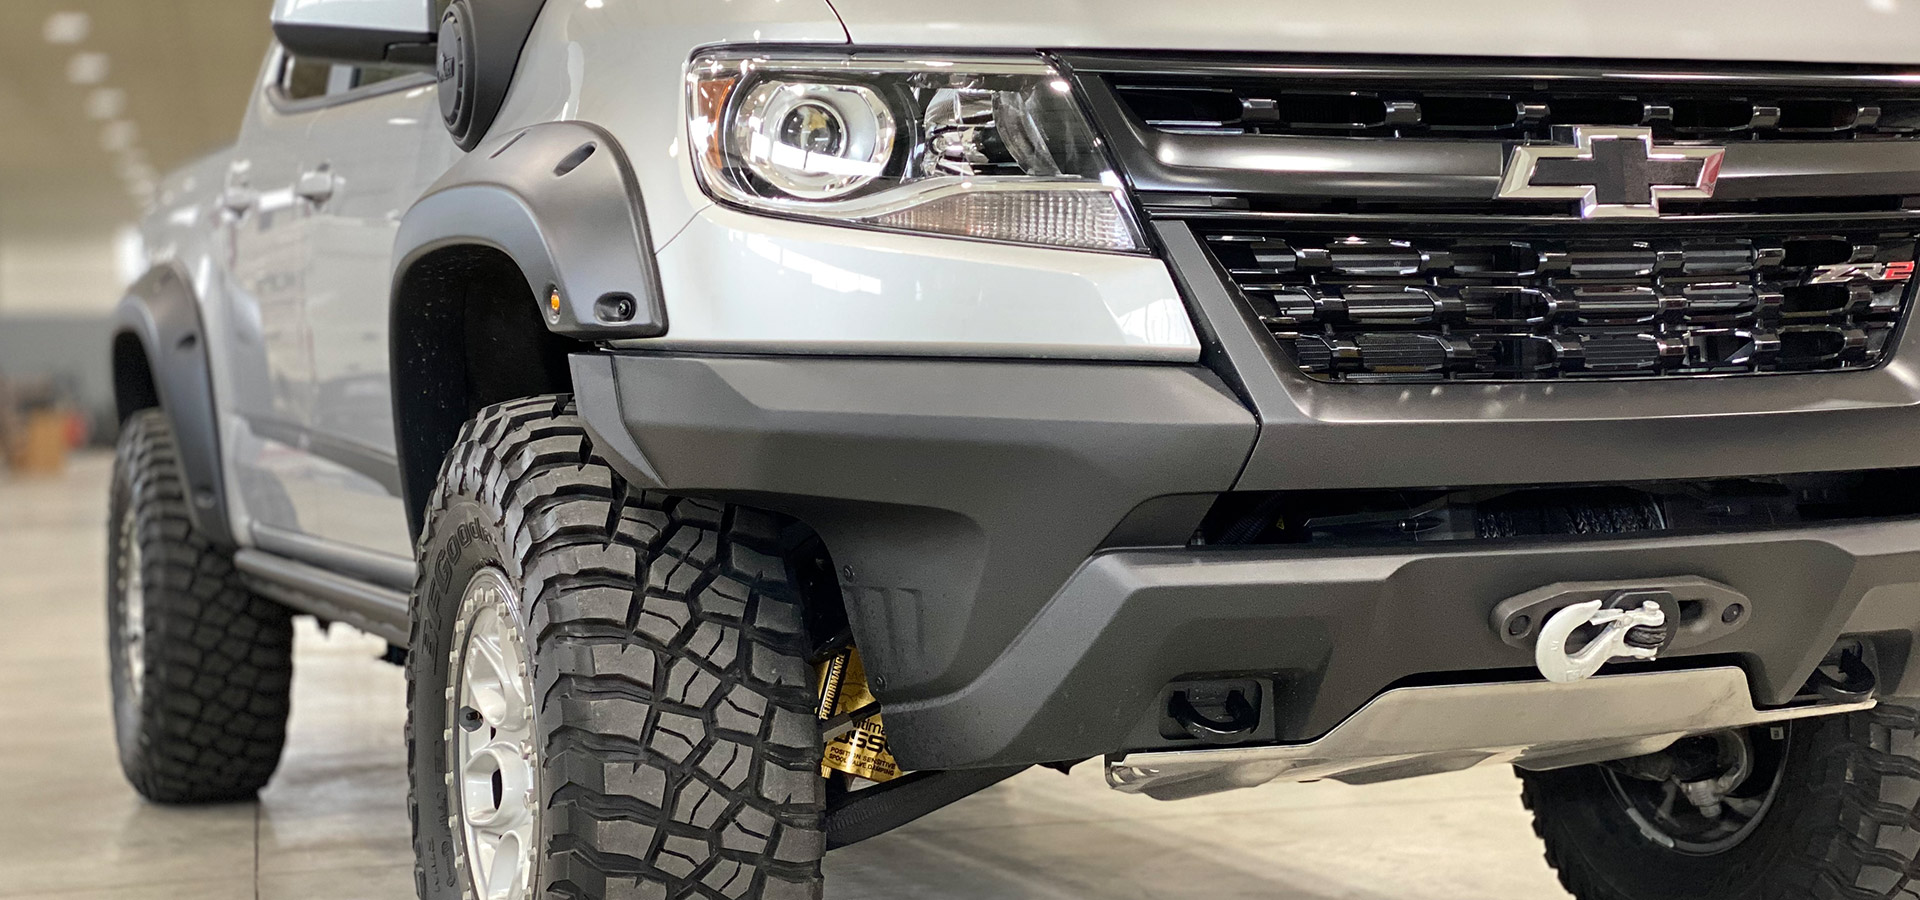 Expedition - - Front - ZR2 Colorado - AEV American Kit 2020 HighMark Flare - 2017 Vehicles